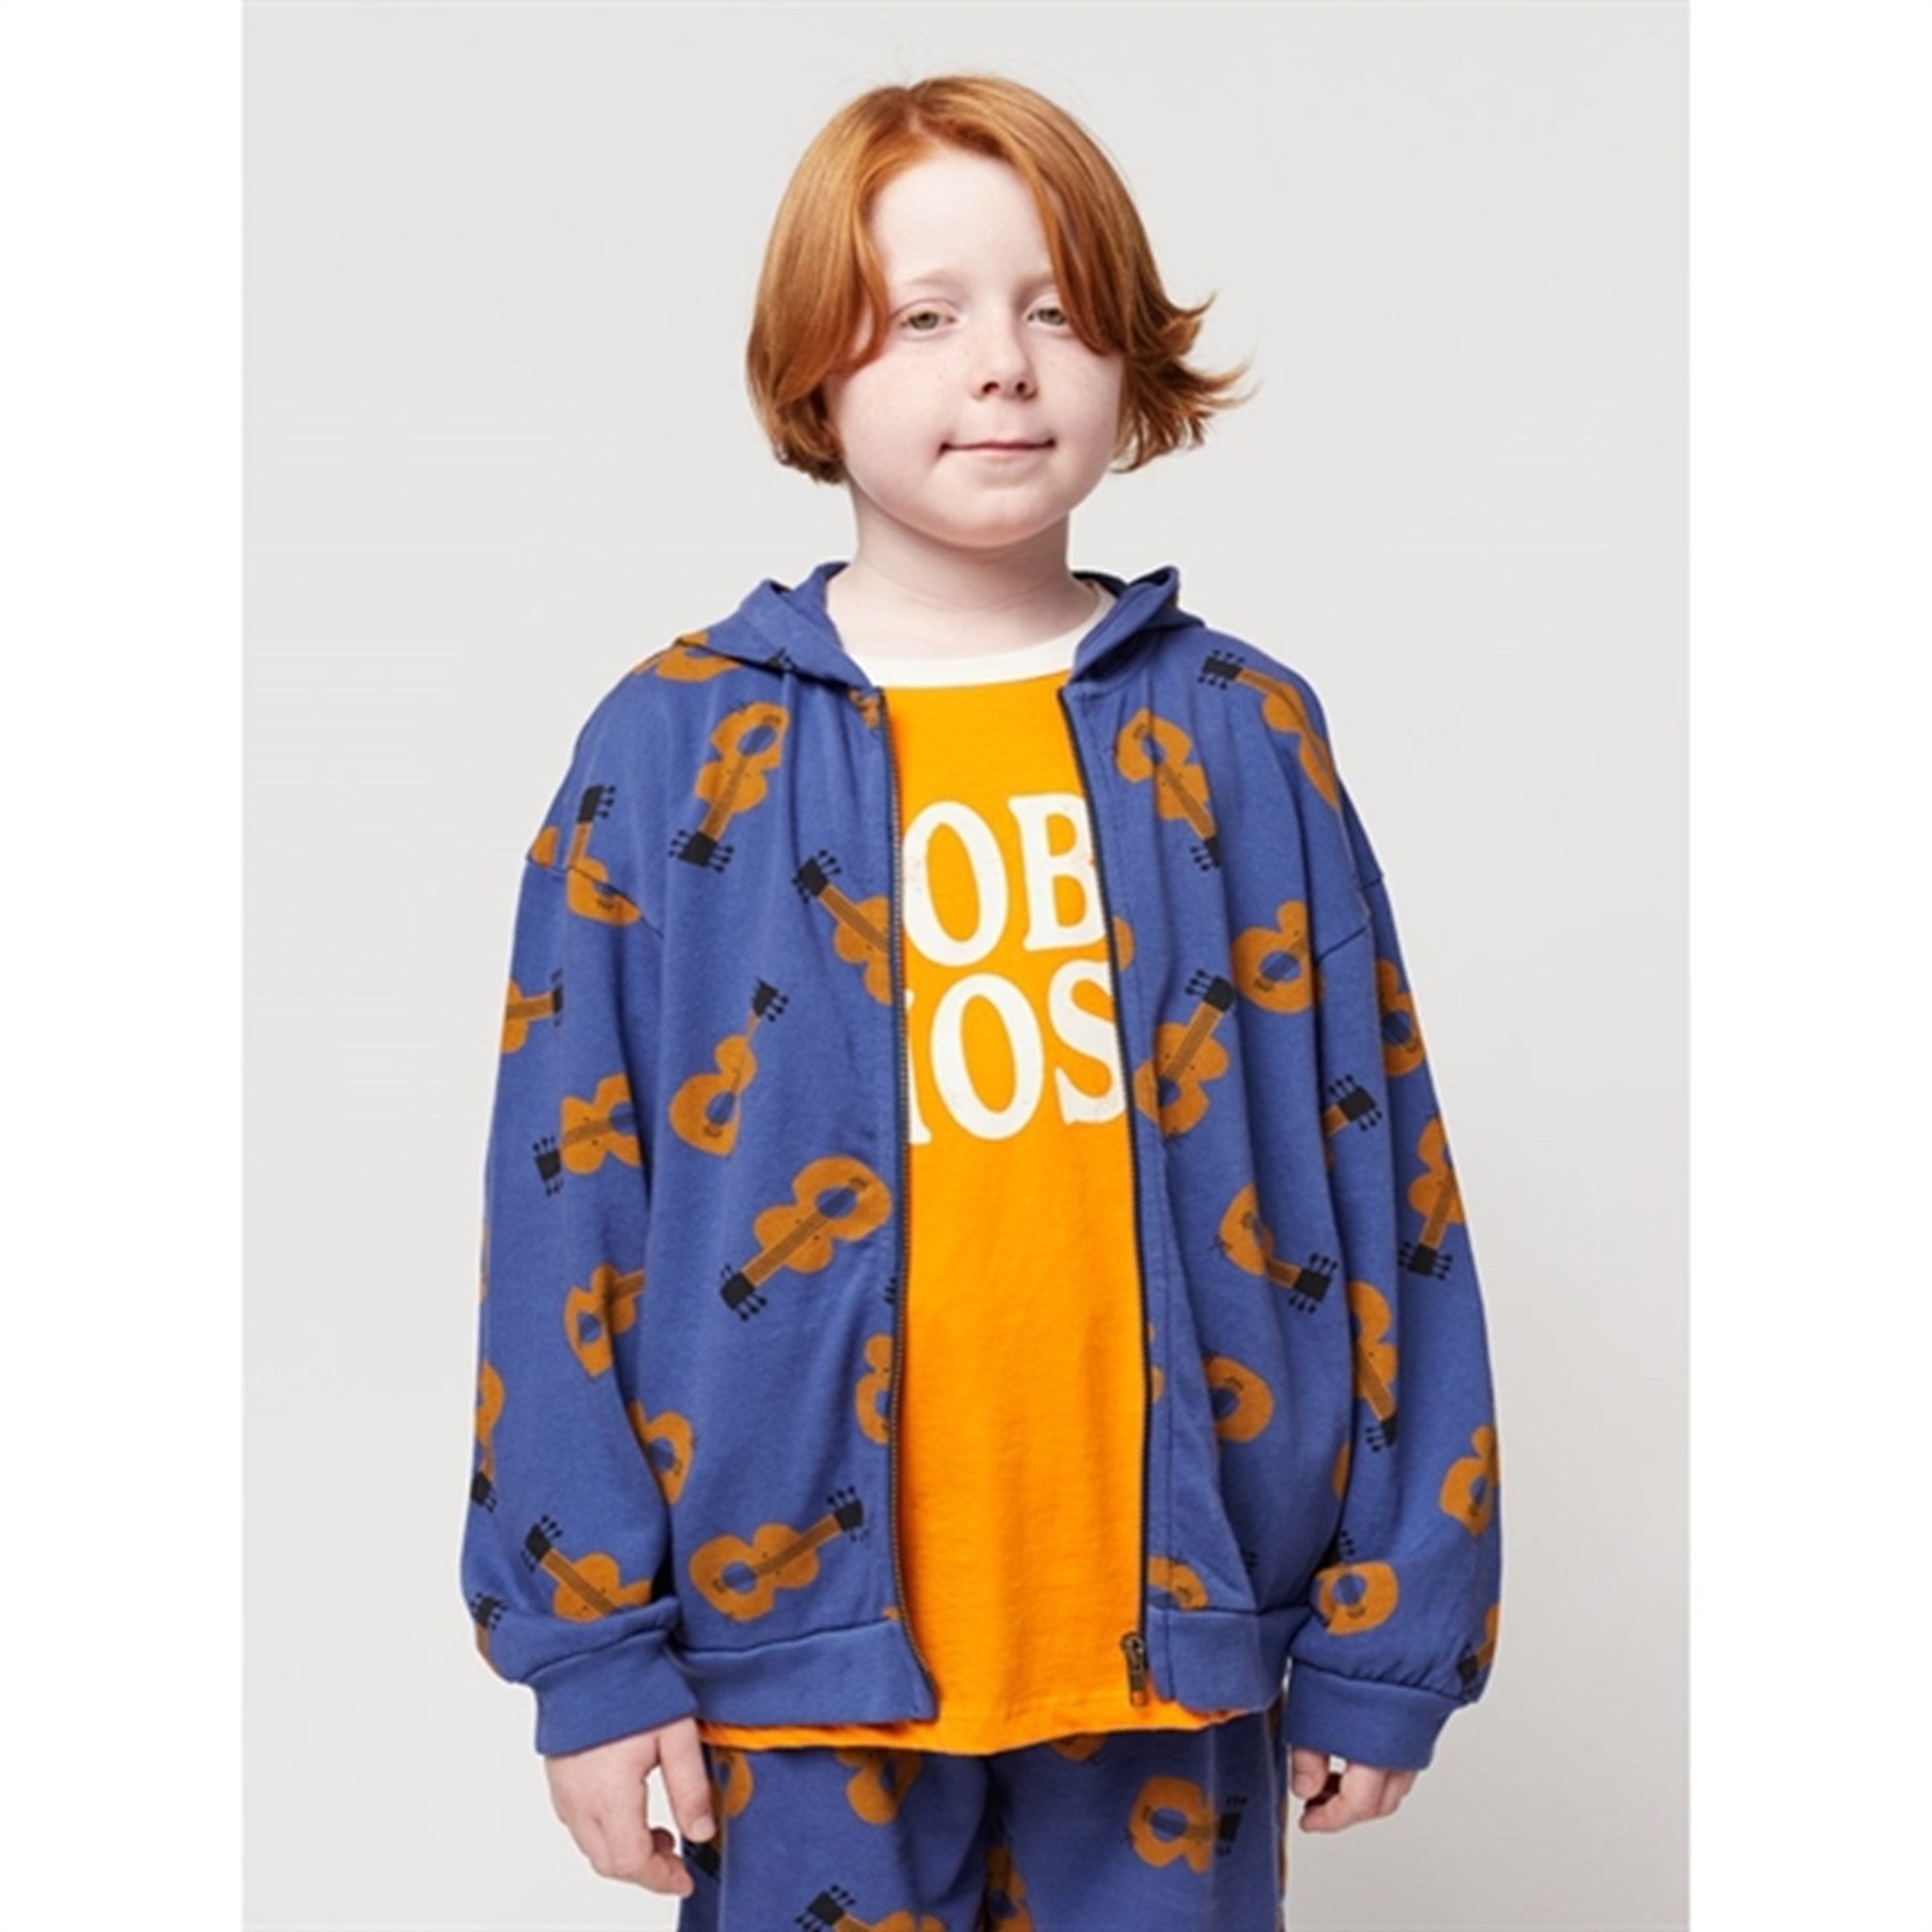 Bobo Choses Acoustic Guitar All Over Zipped Hoodie Navy Blue 4